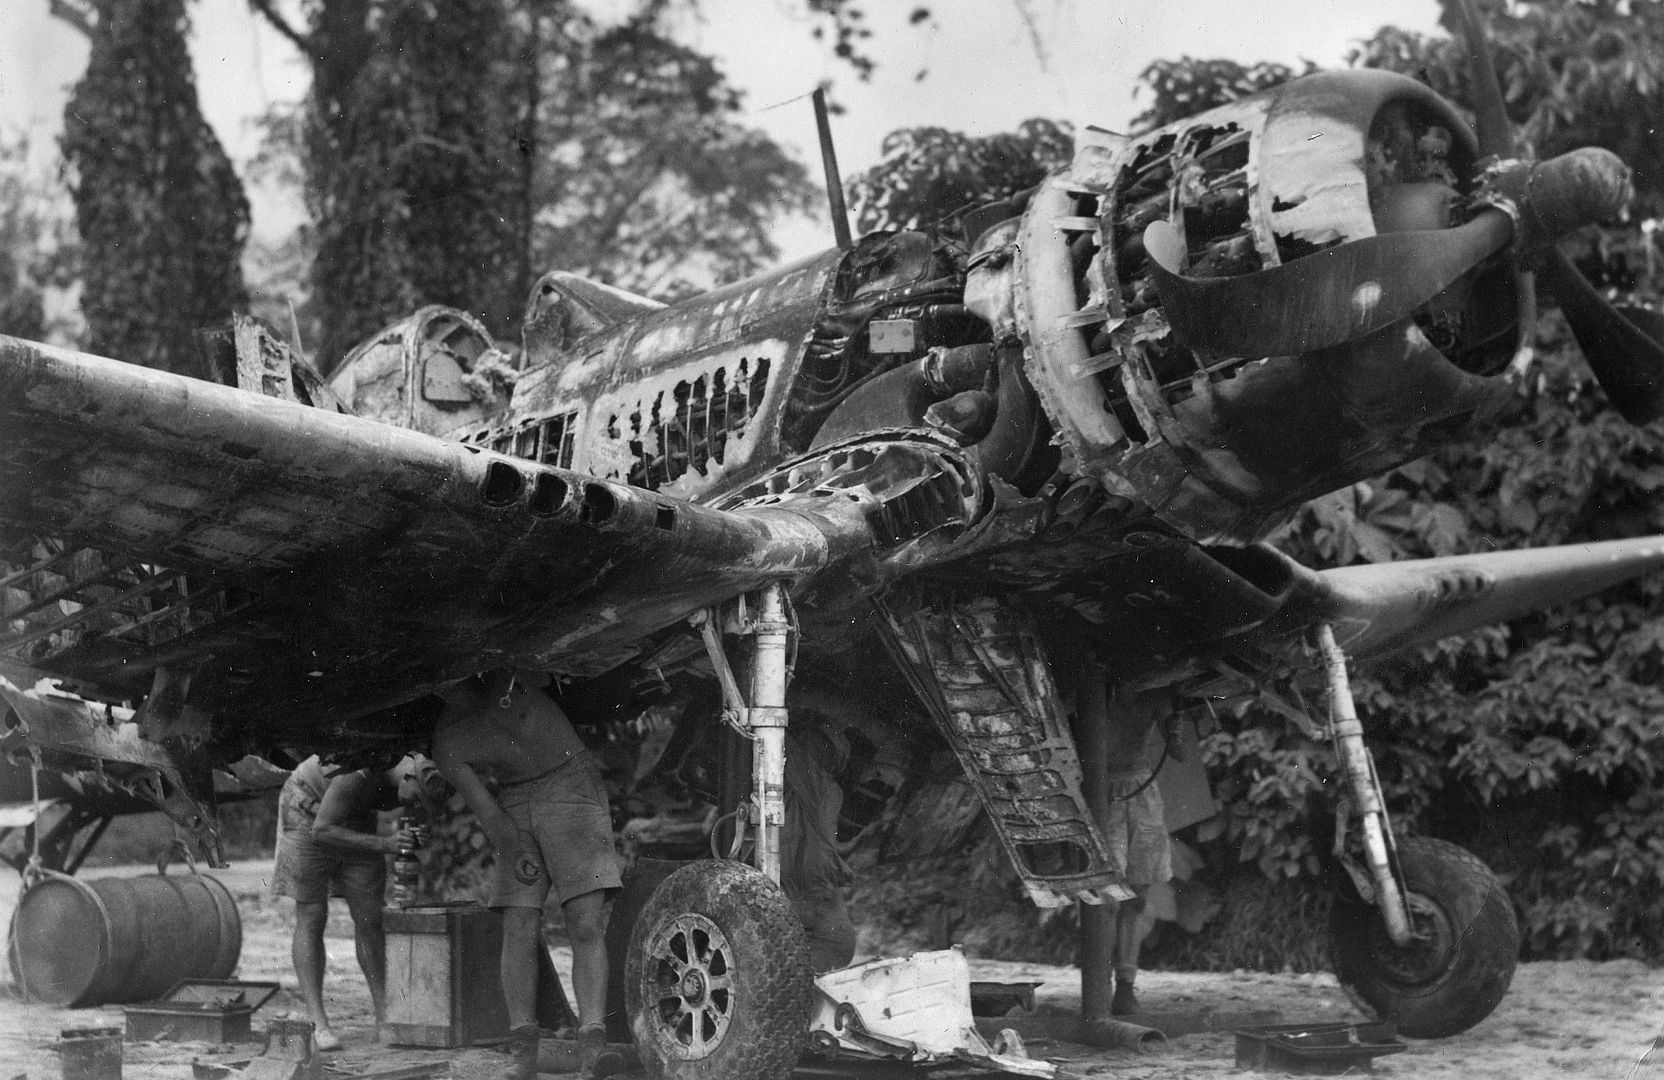 Burnt_out_Chance_Vought_F4U_Corsair_NZ5343_after_an_accident_on_13_April_1945._Piva_Bougainville.(2).jpg